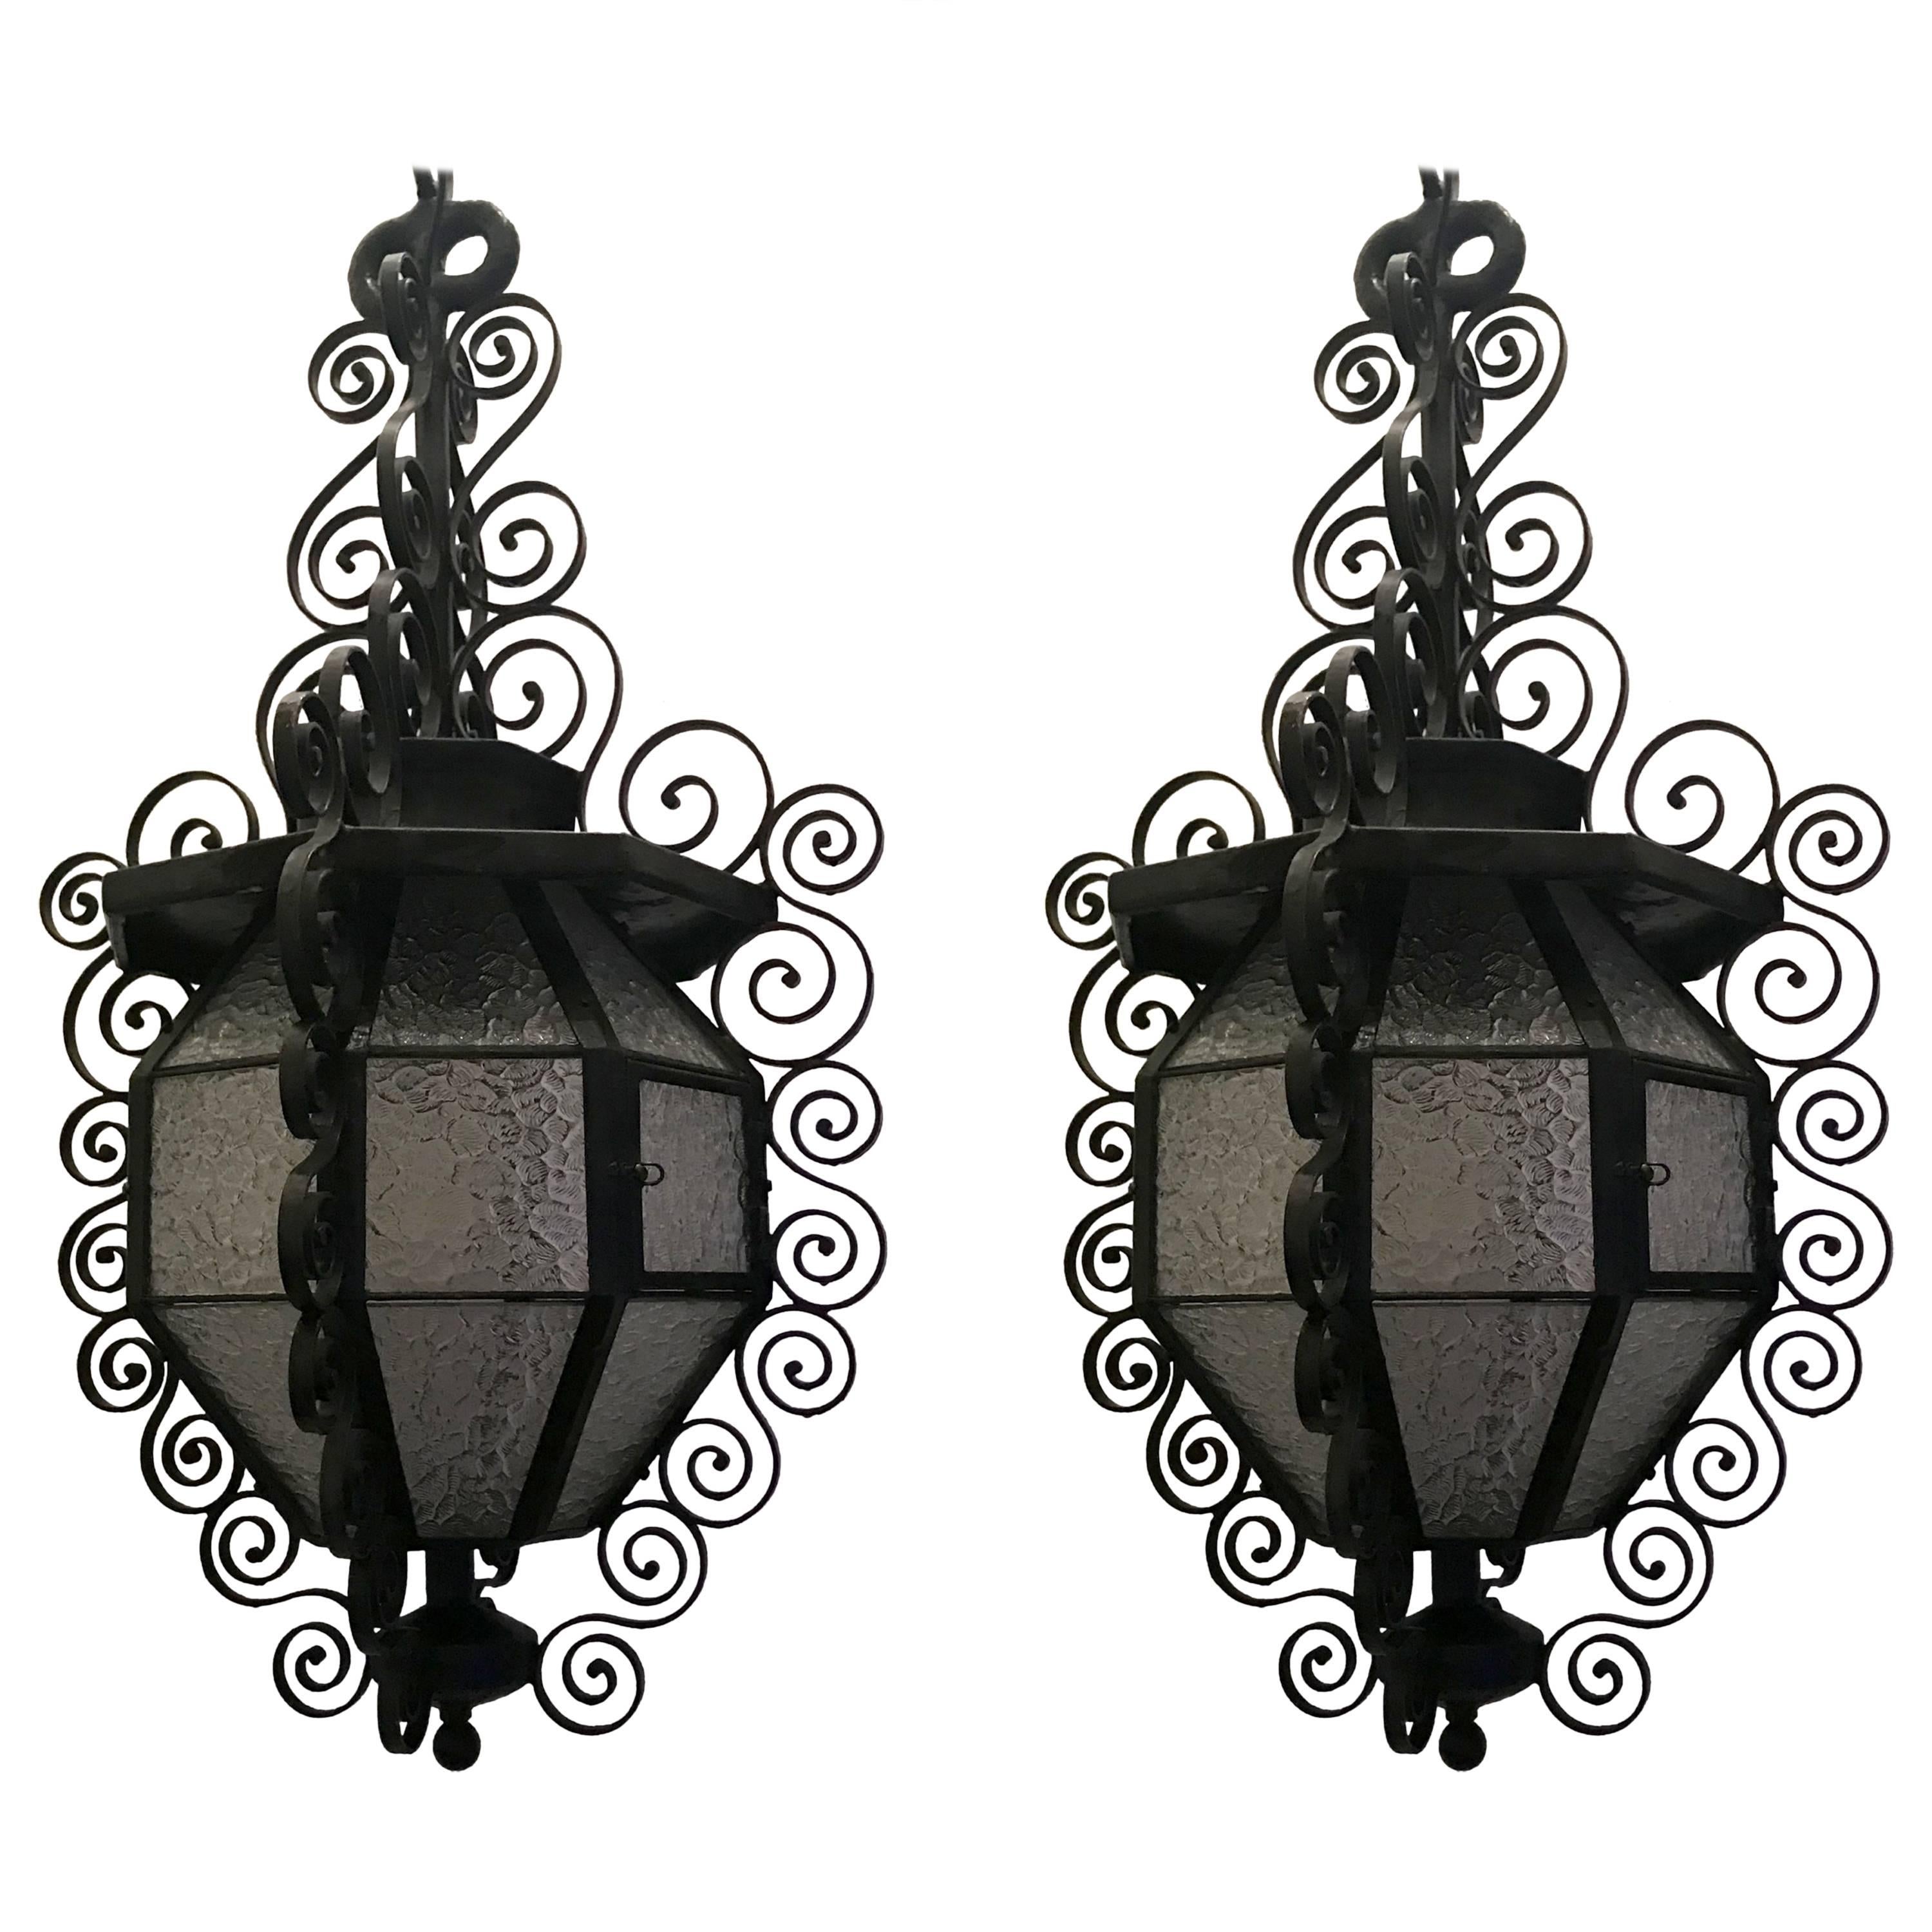 Pair of French Iron Art Nouveau Glass Panel Lantern Pendent Light Fixture For Sale